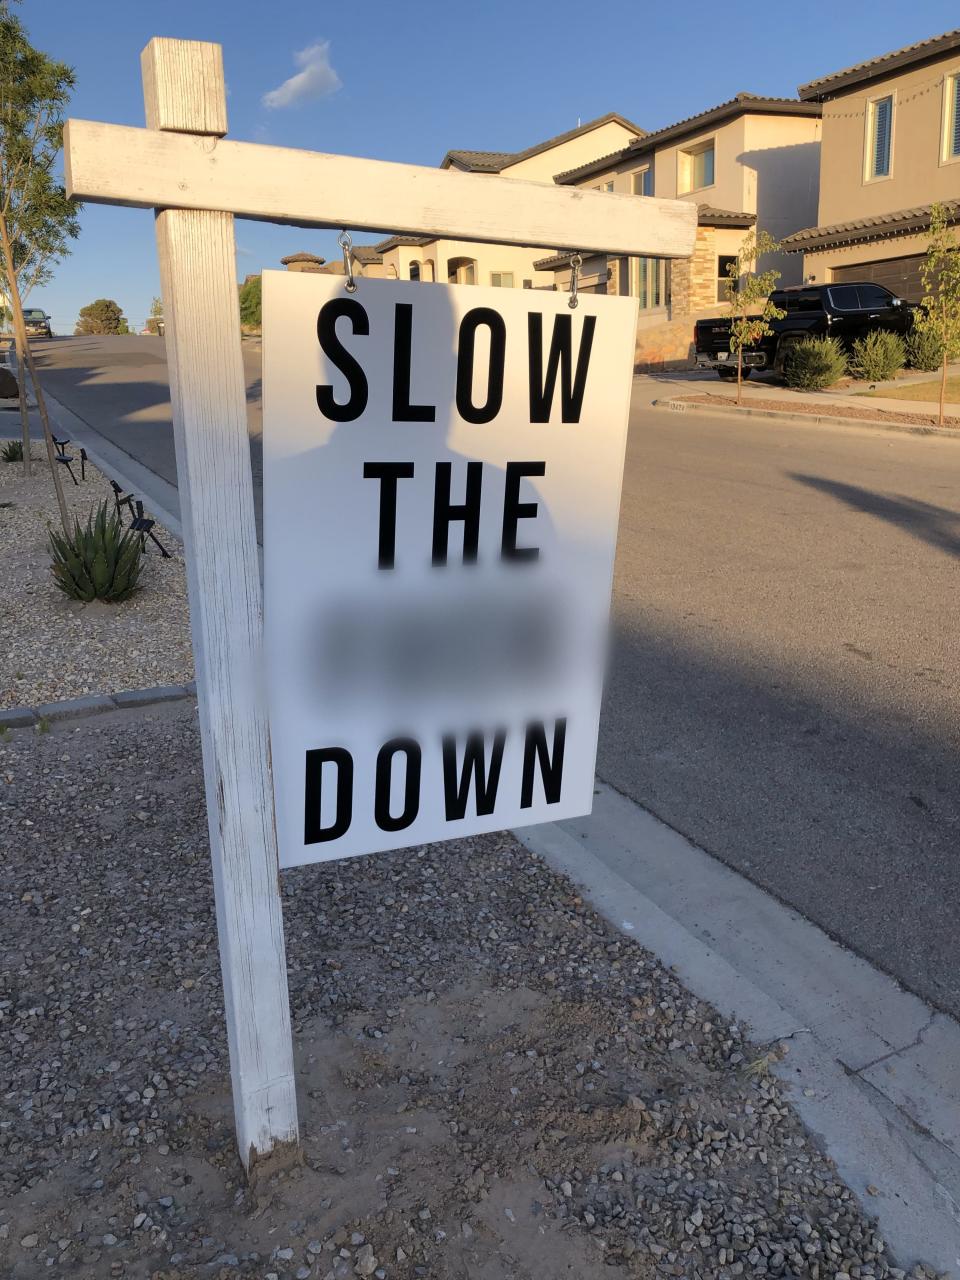 Julio Ayala put the sign outside his home in Horizon City to get speeding drivers to slow down in his neighborhood.